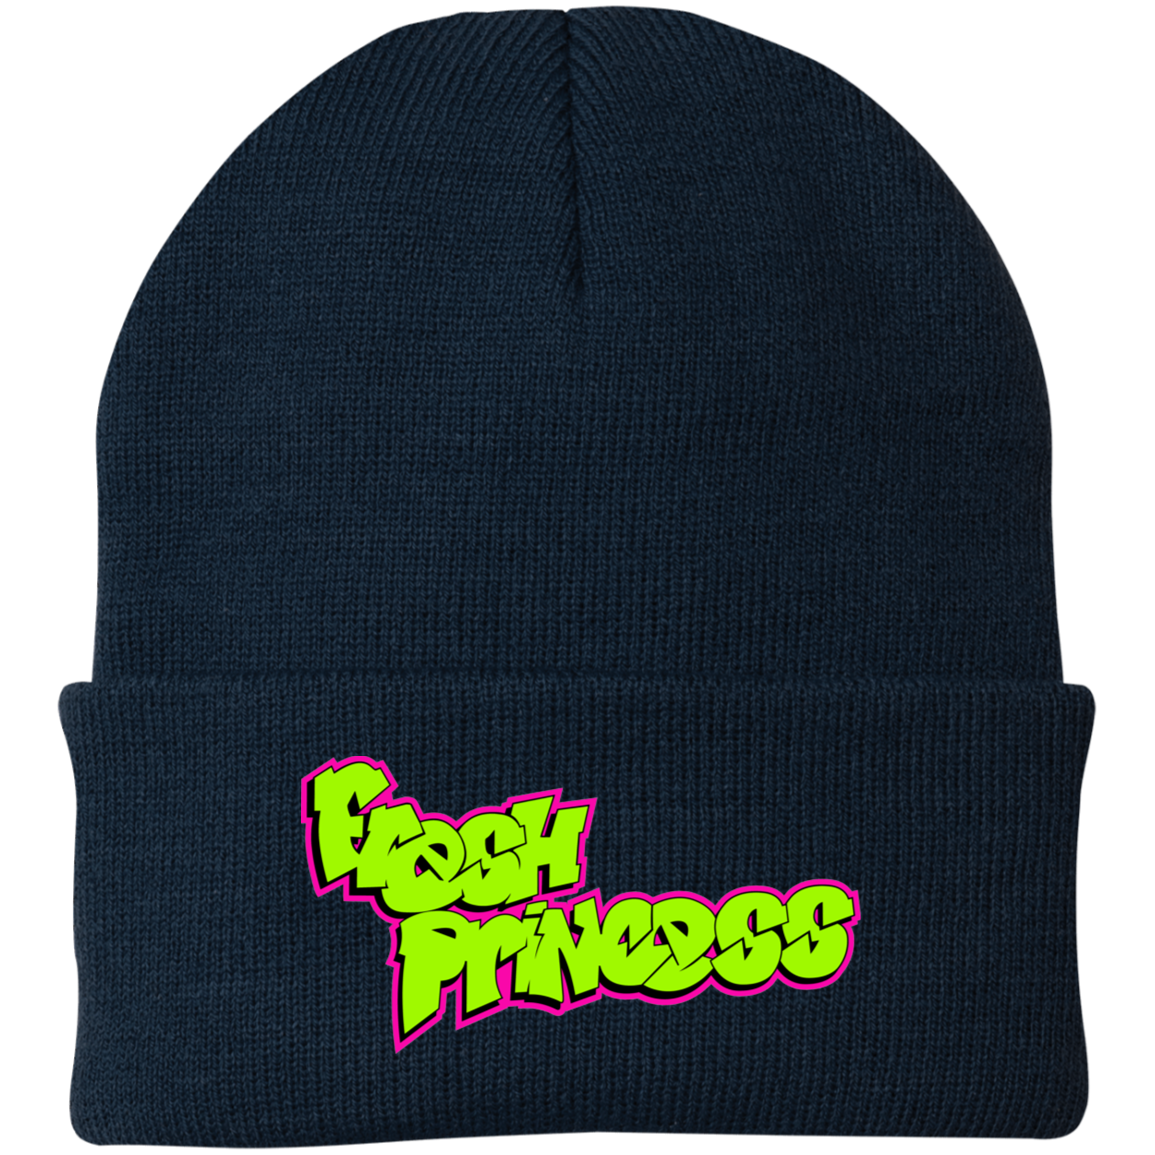 Princess Embroidered Knit Cap